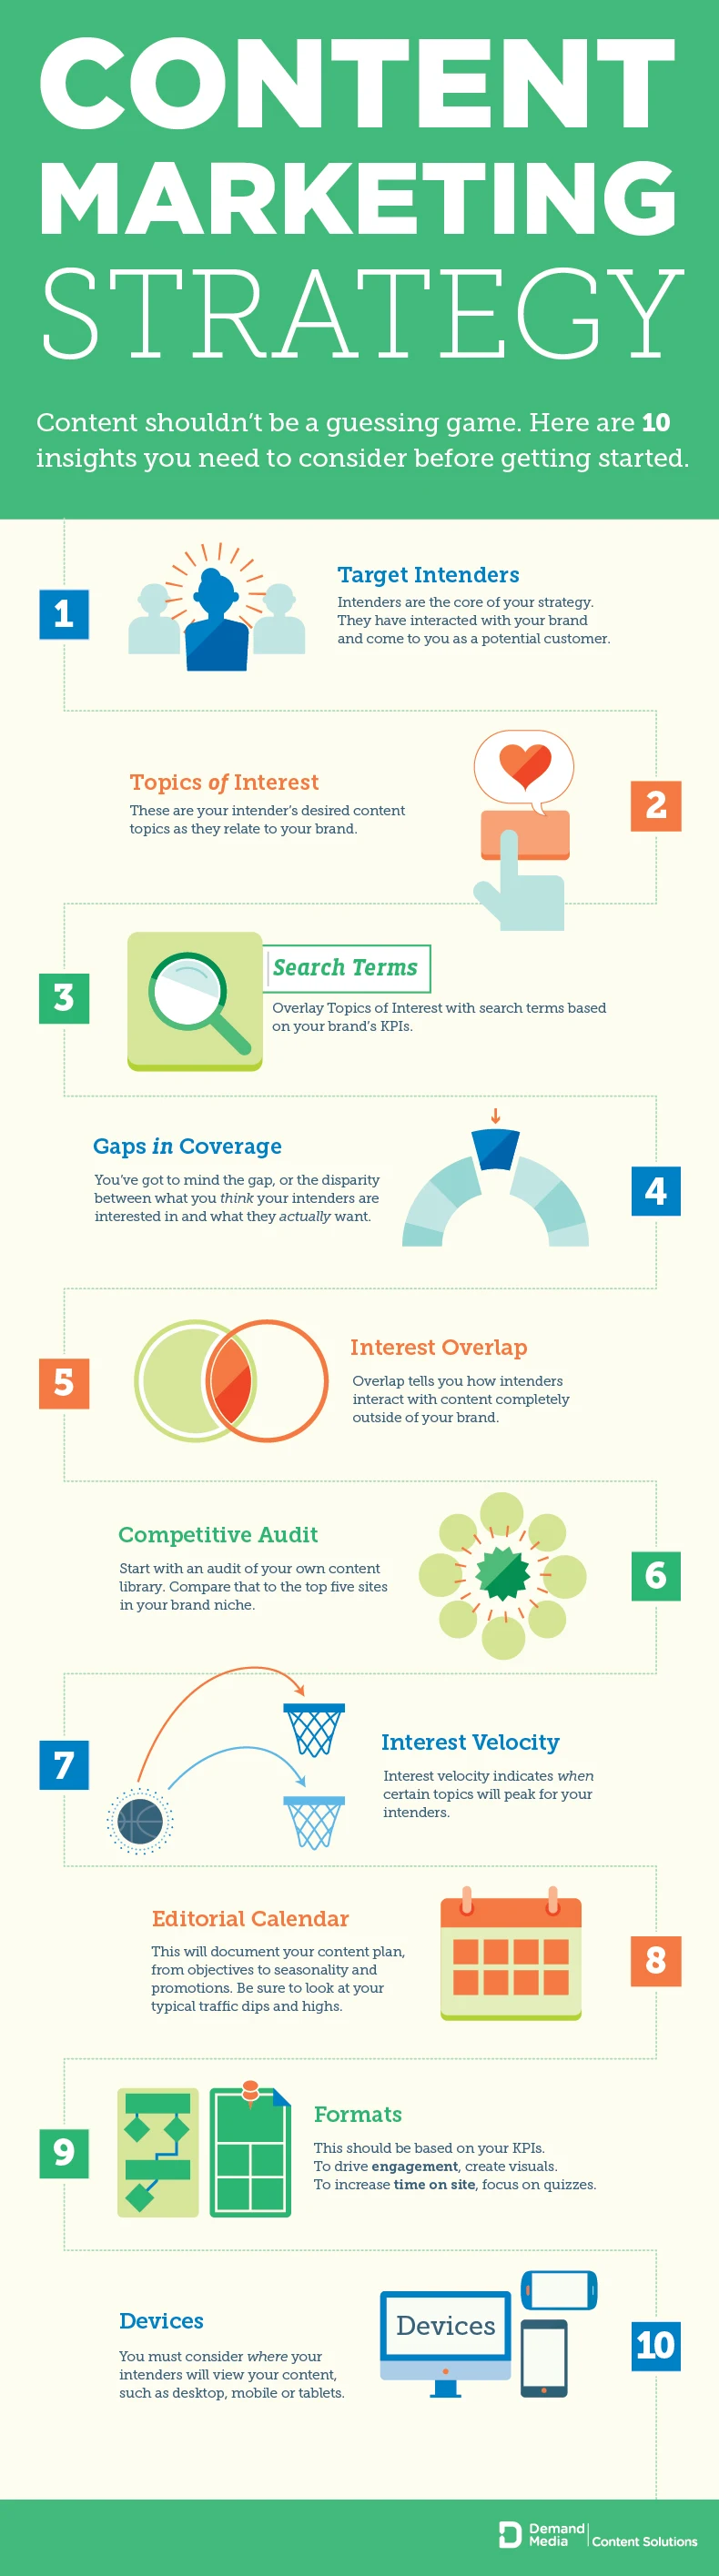 10 Easy Steps to Crafting a Successful Content Strategy - #infographic #contentmarketing